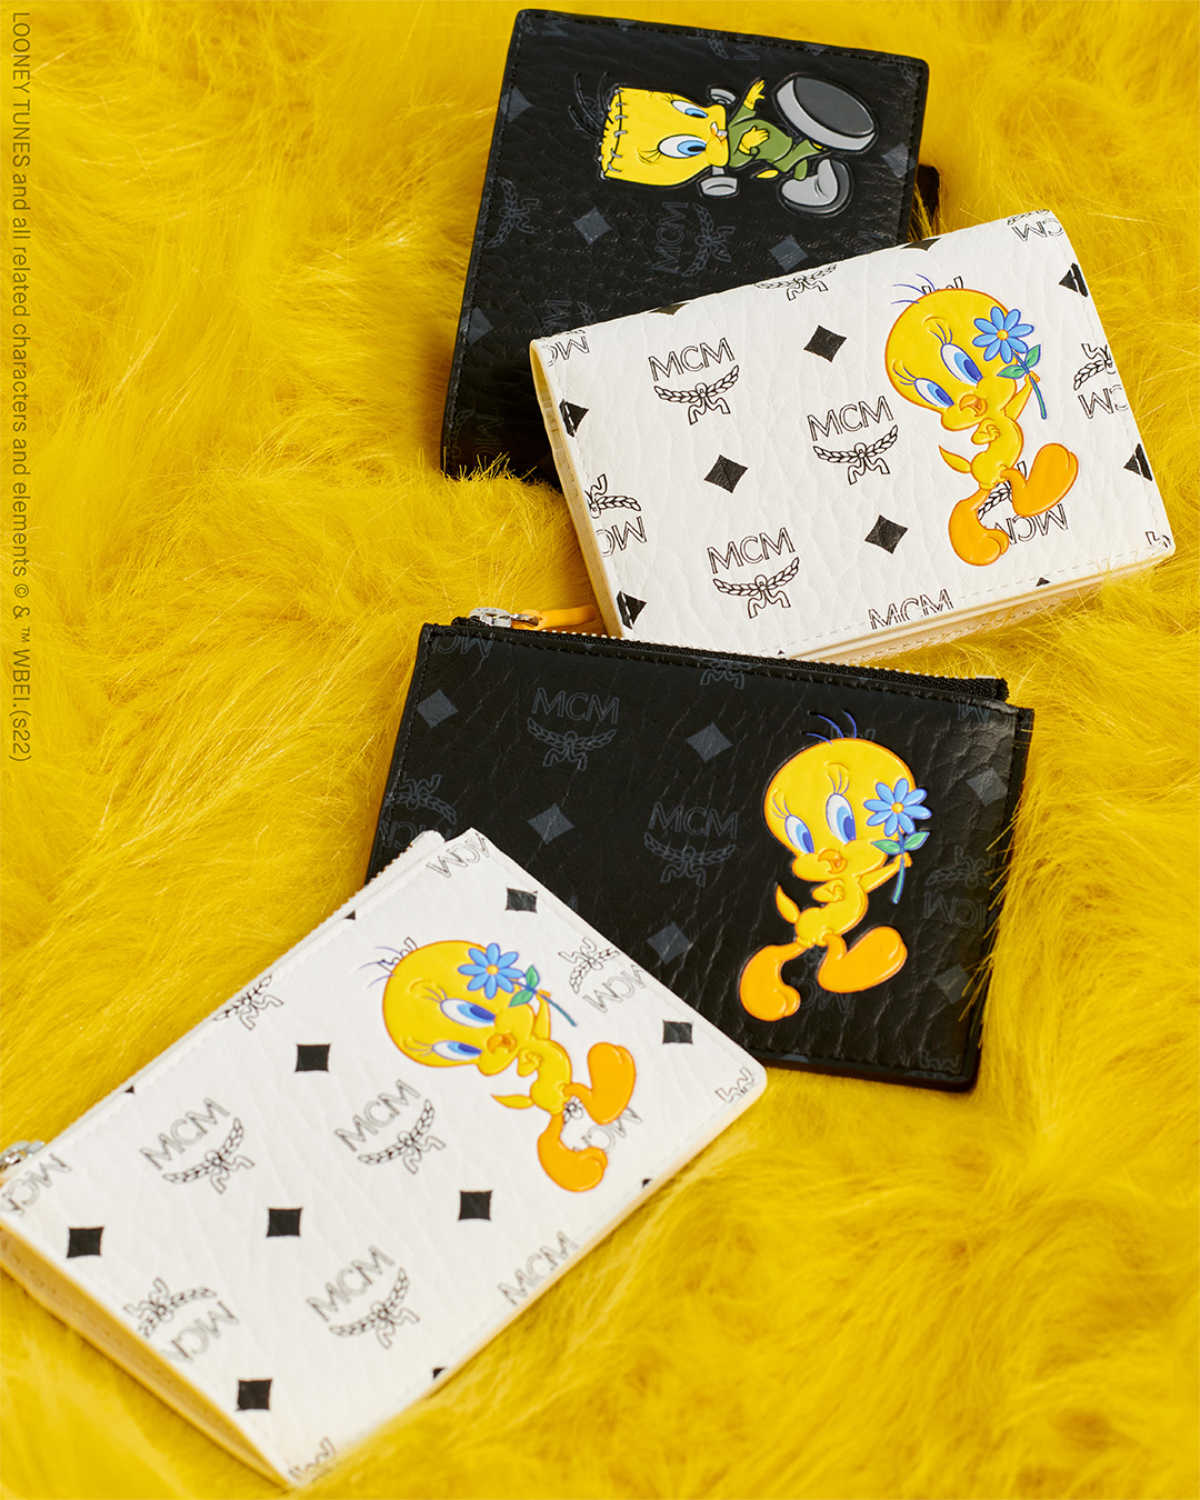 MCM Celebrates “80 Years Of Tweety” With Release Of All-New Collection